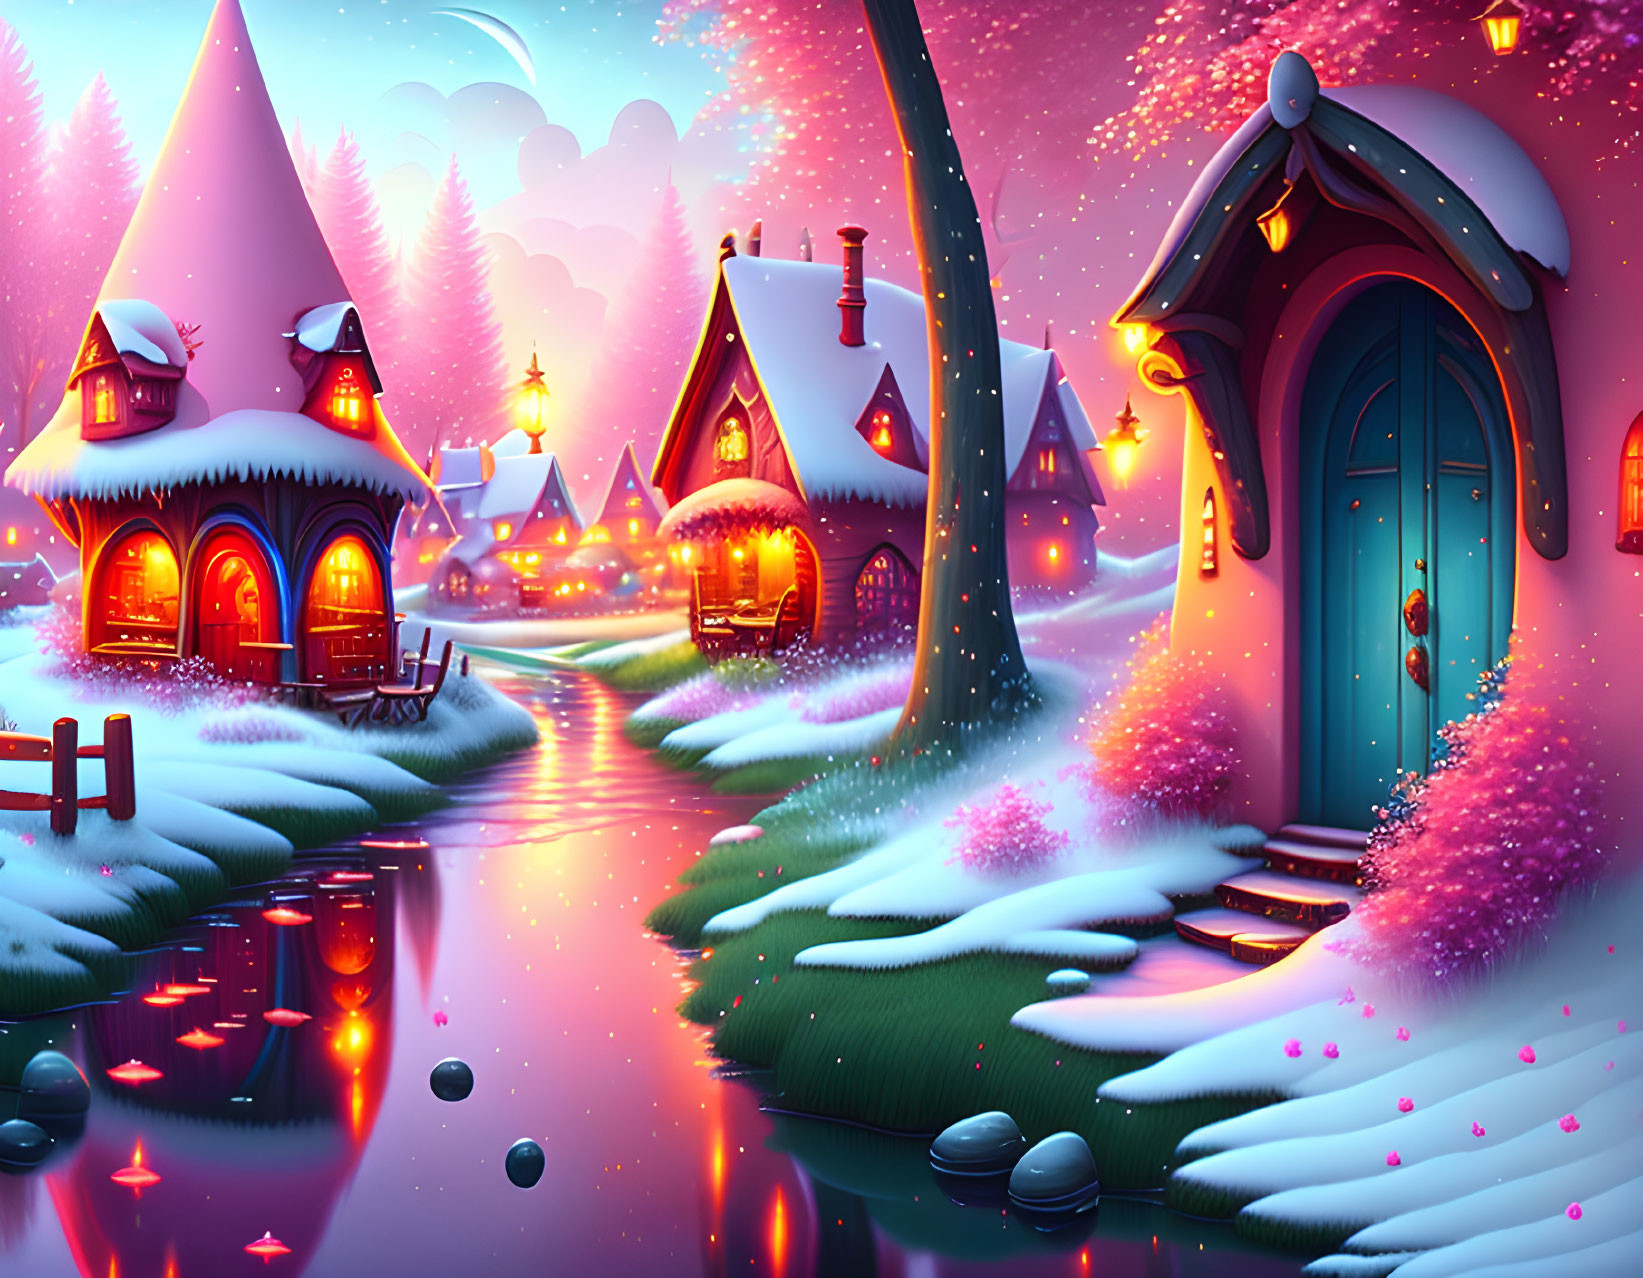 Fantasy village with whimsical cottages and glowing windows in snowy twilight